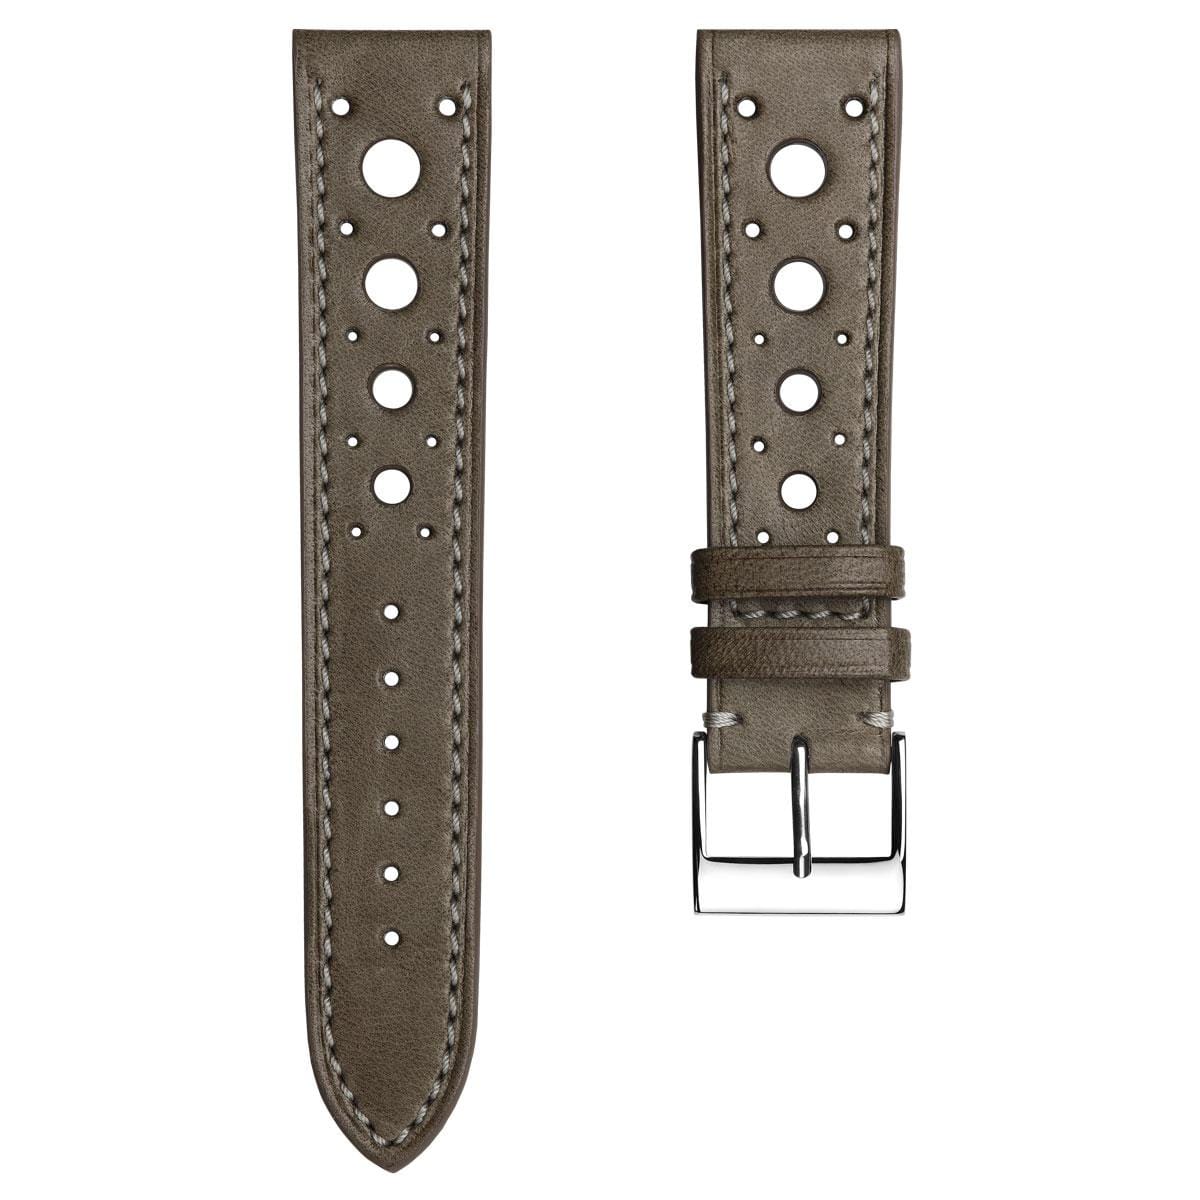 Boutsen Cavallo HS Sport Racing Watch Strap - Taupe